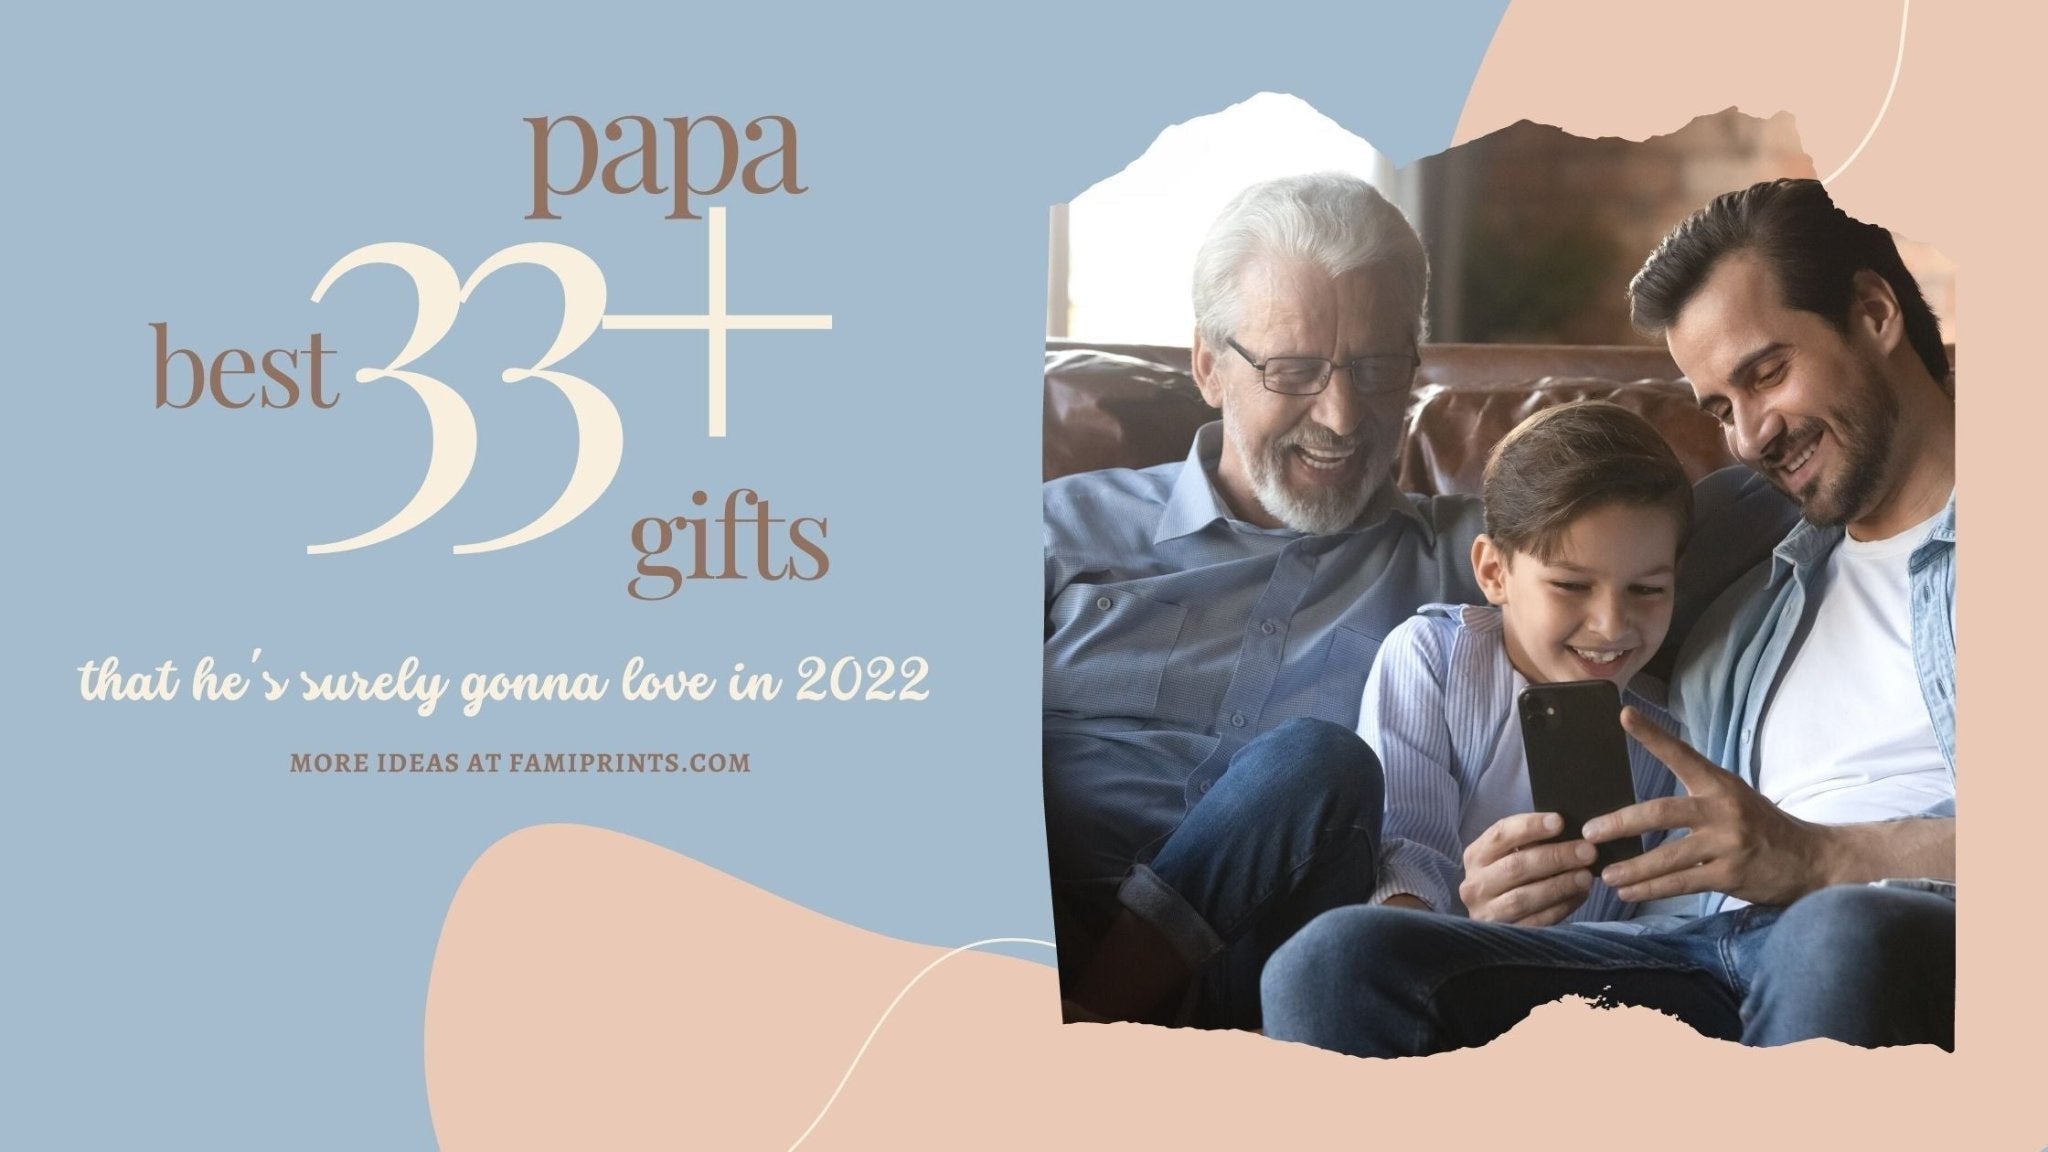 33+ Best Papa Gifts That He's Surely Gonna Love In 2022 - FamiPrints | Trending Customizable Family Gifts